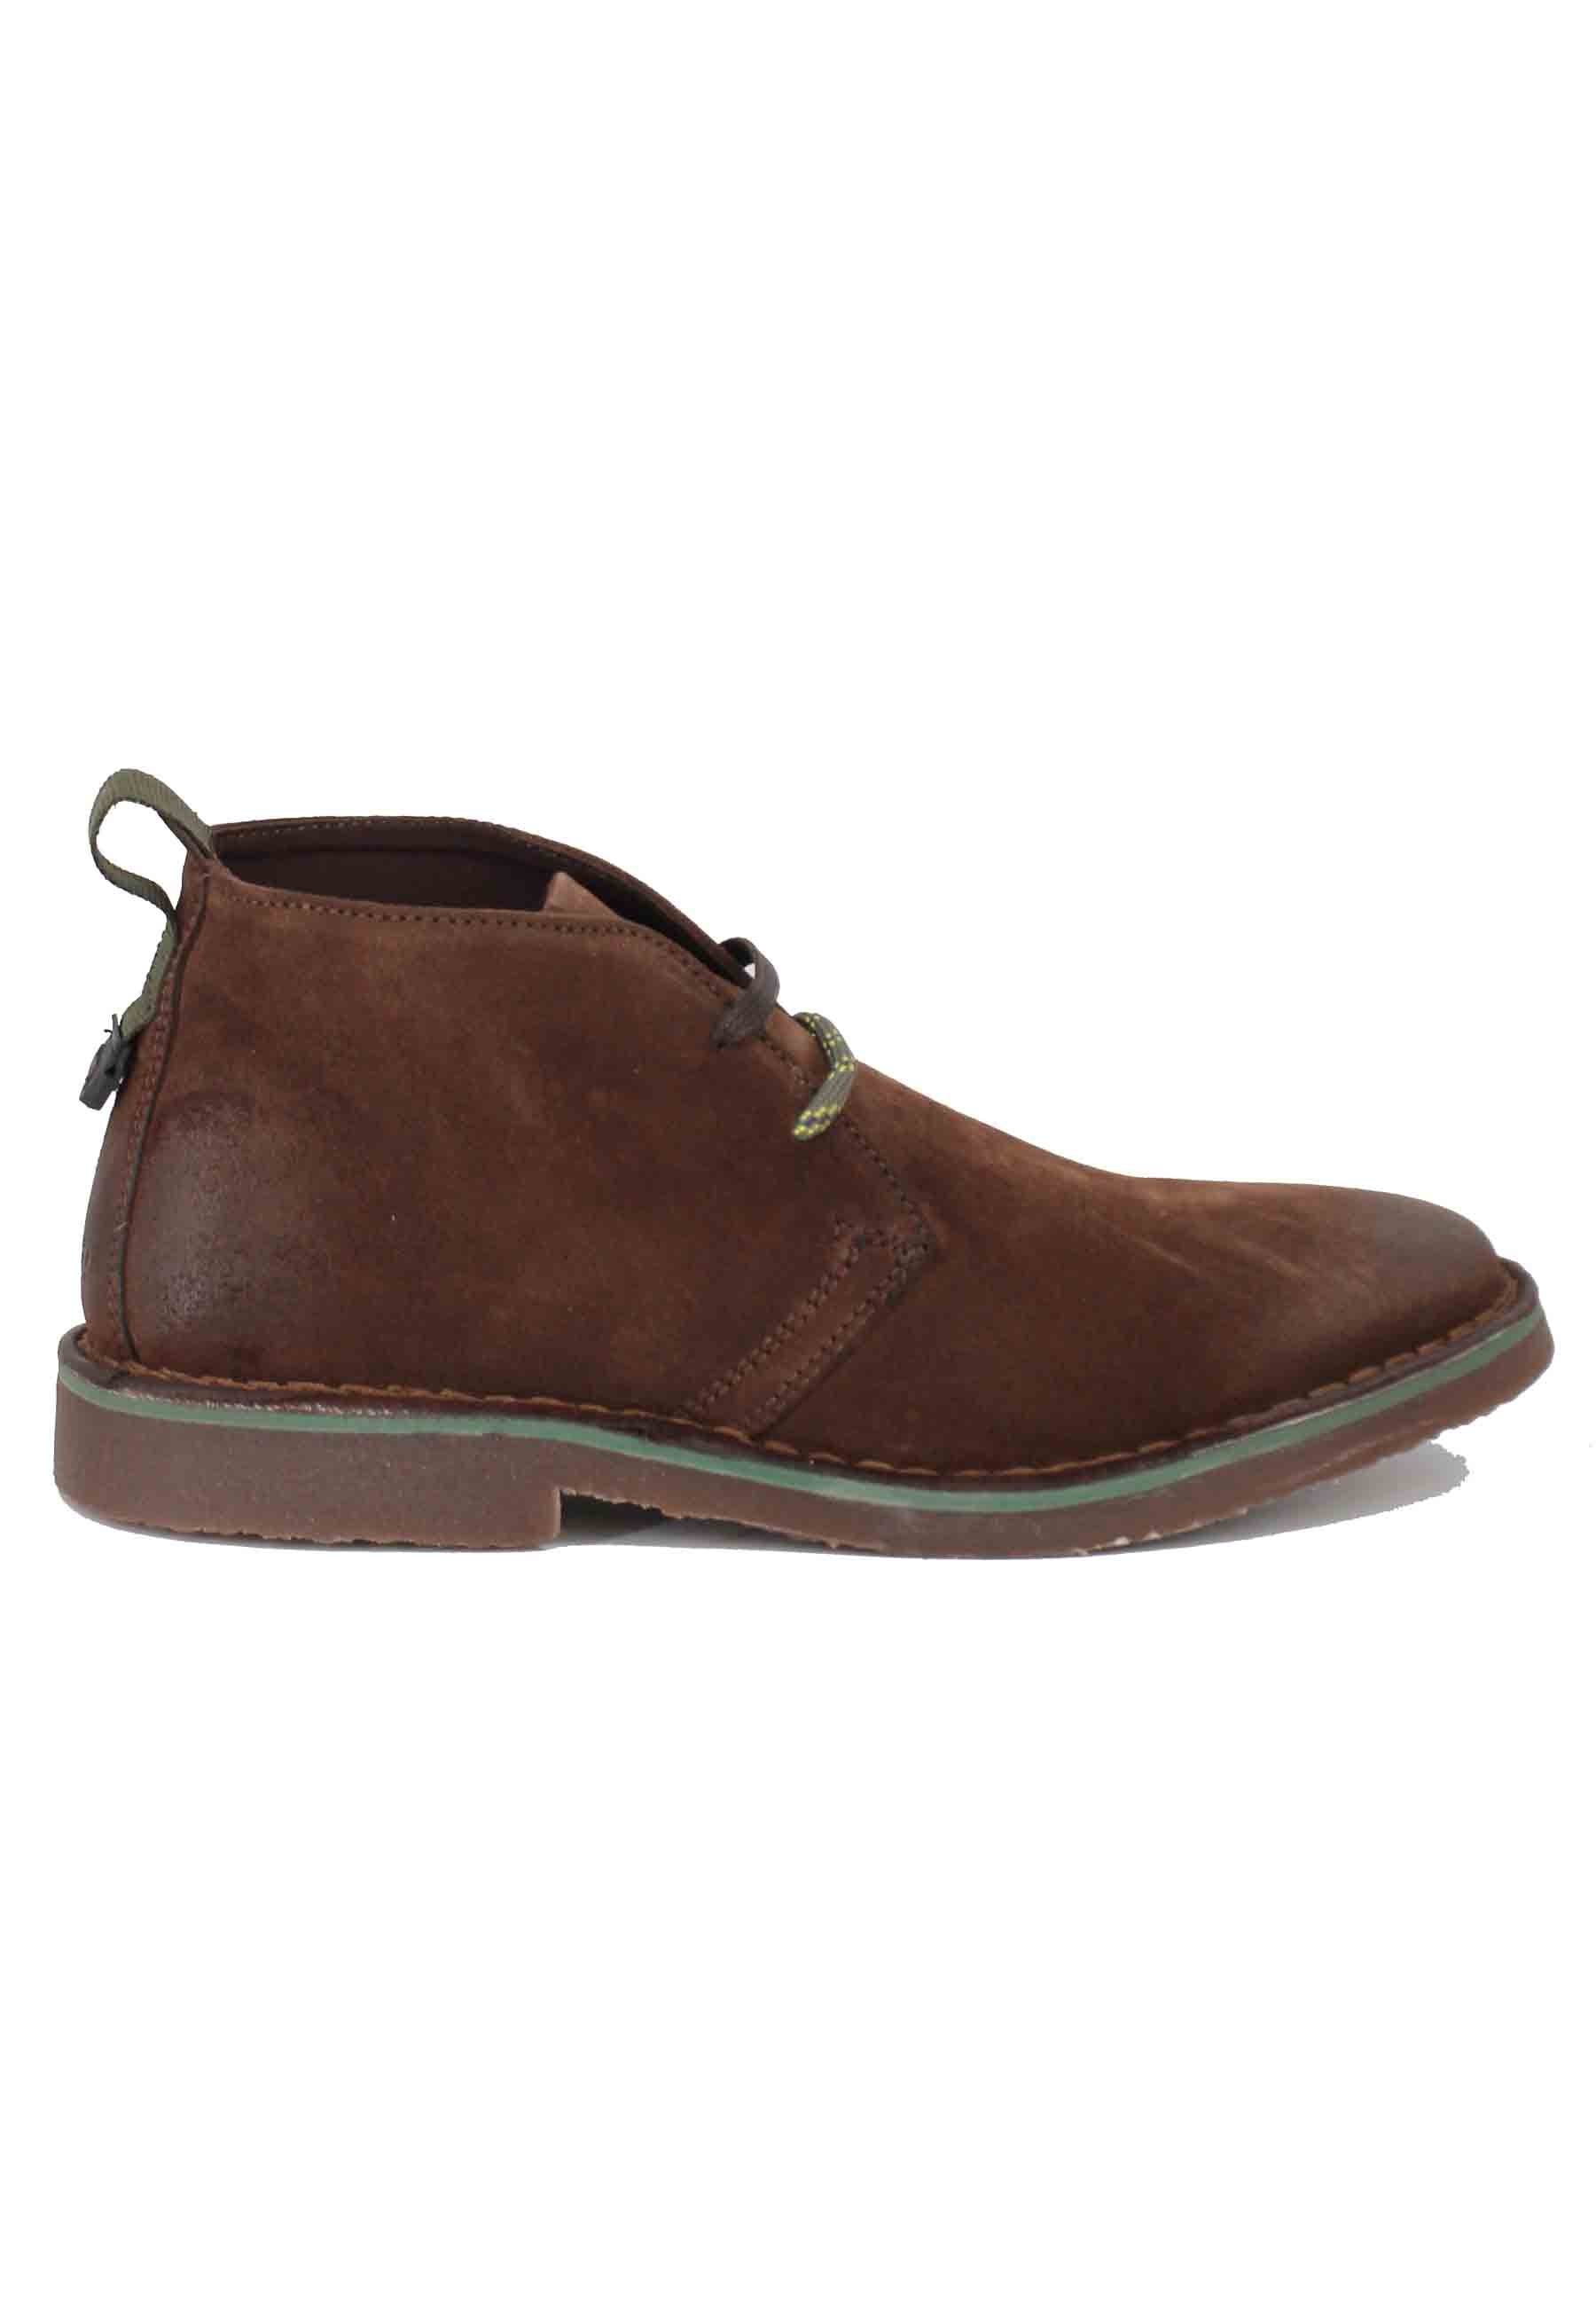 Overland men's ankle boots in dark brown suede with crepe sole